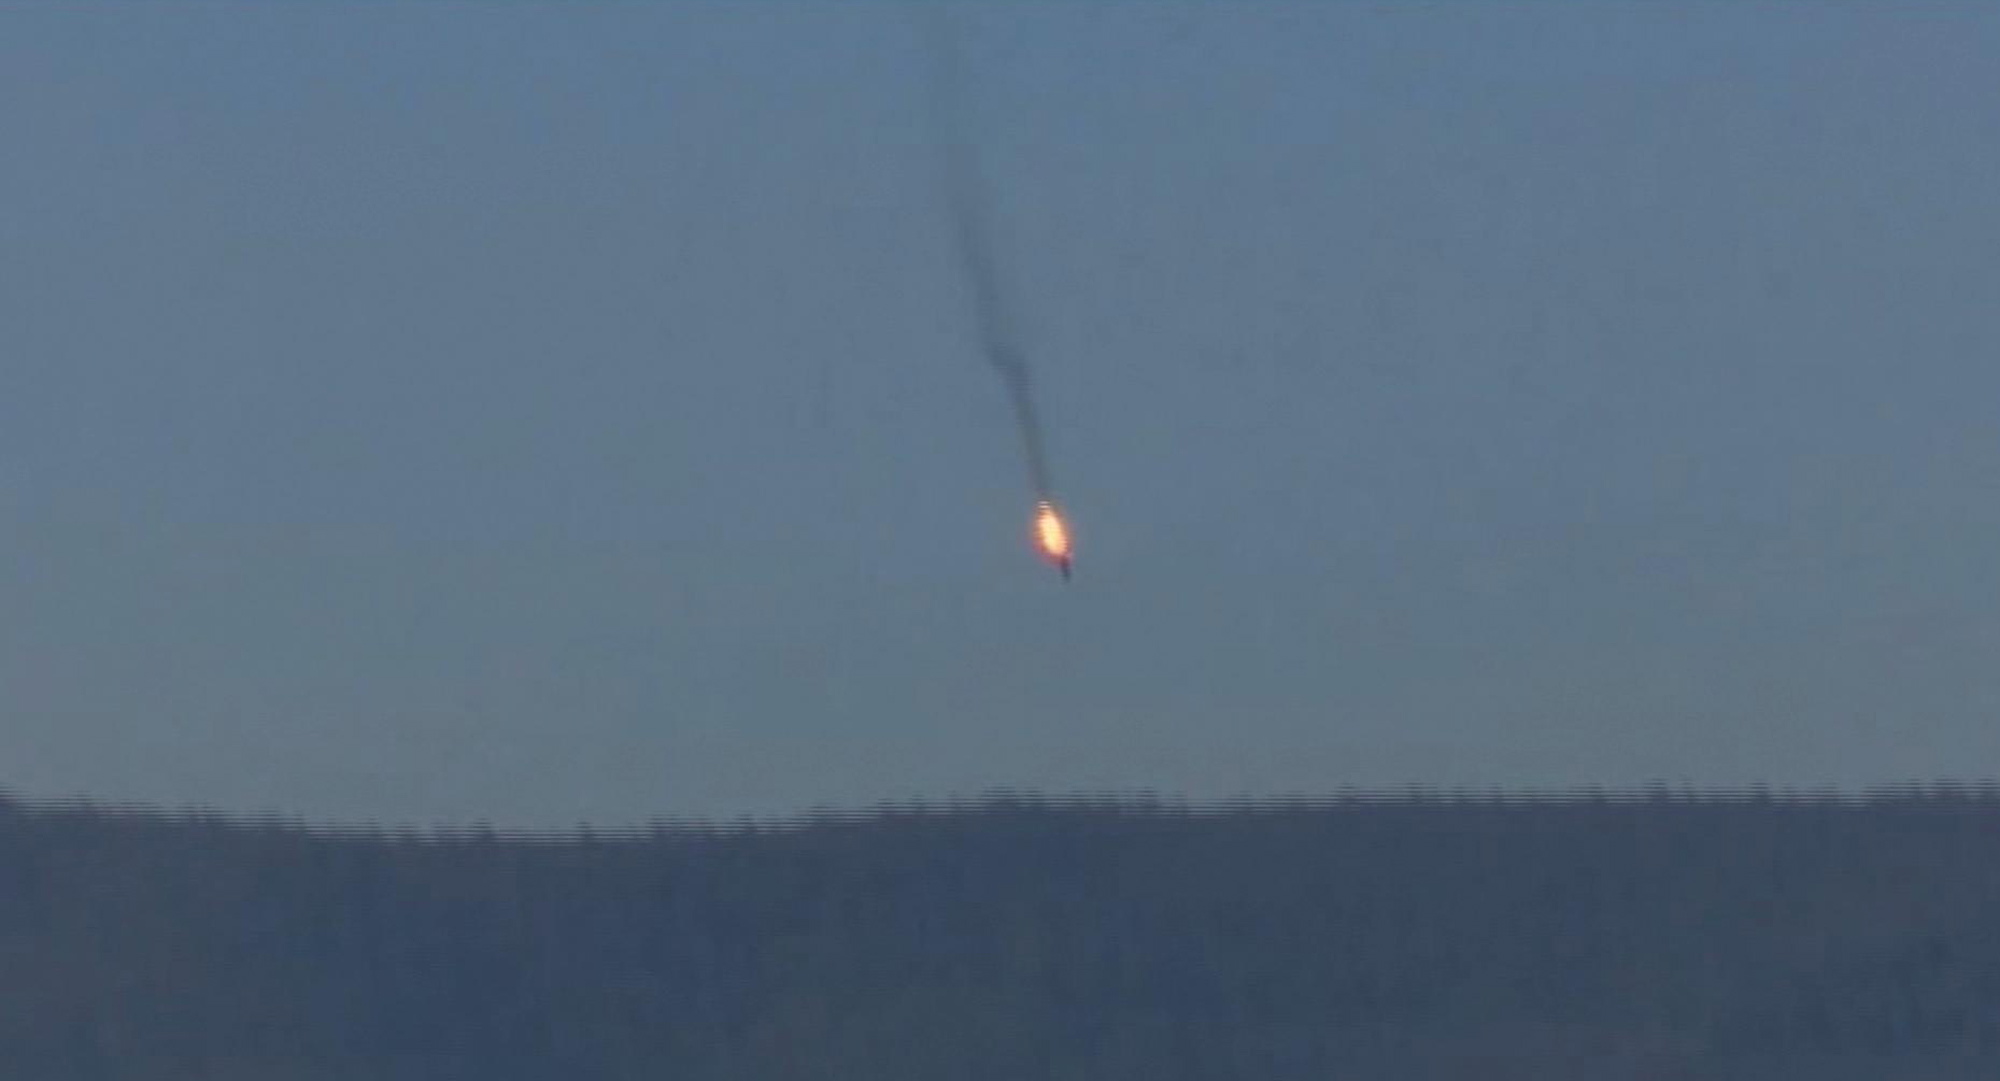 A Russian warplane on fire before crashing on a hill as seen from Hatay province, Turkey, on Tuesday. Turkey shot down the Russian warplane Tuesday, claiming it had violated Turkish airspace and ignored repeated warnings. Russia denied that the plane crossed the Syrian border into Turkish skies.